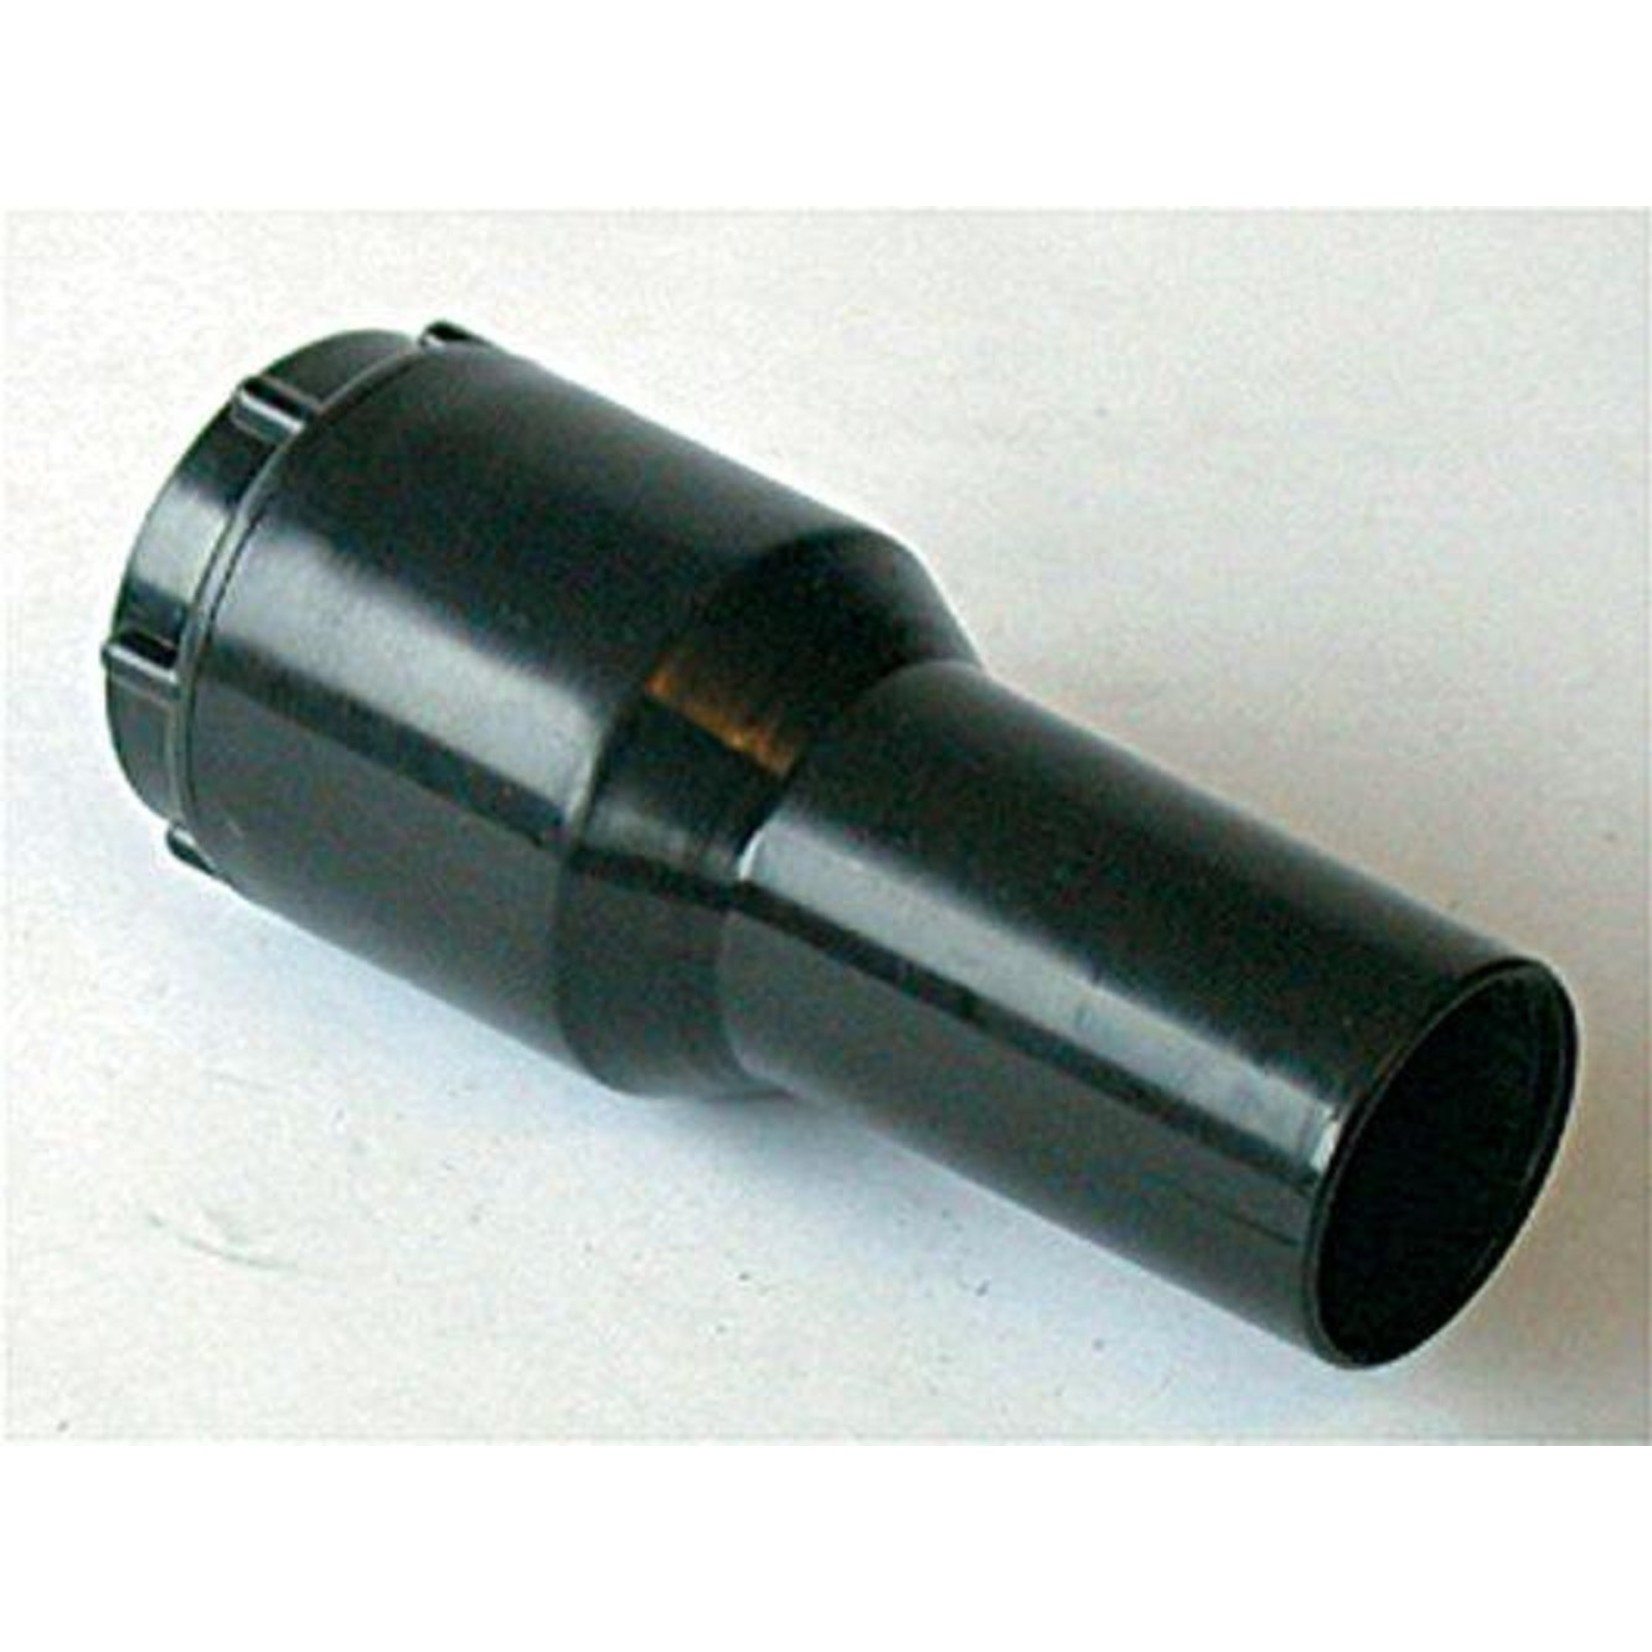 Lindhaus Lindhaus 1.25" Hose End w/ Swivel for Healthcare Pro